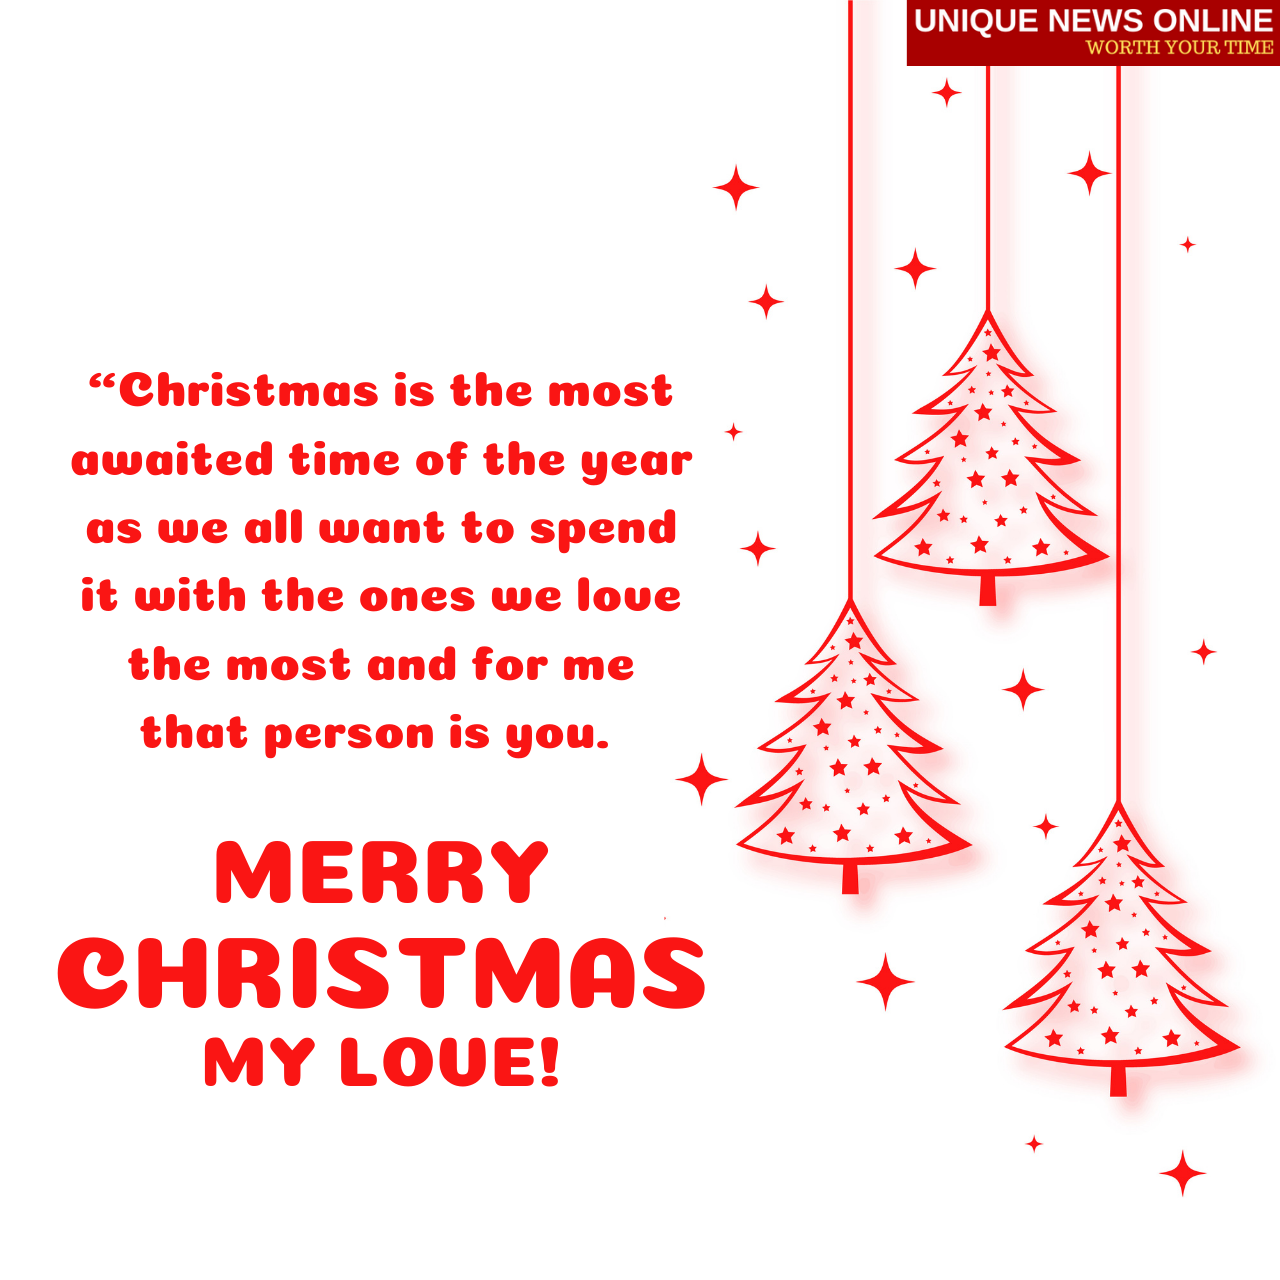 Merry Christmas 2021 Quotes, Wishes, Images, Messages, Greetings, Sayings for Boyfriend/Girlfriend